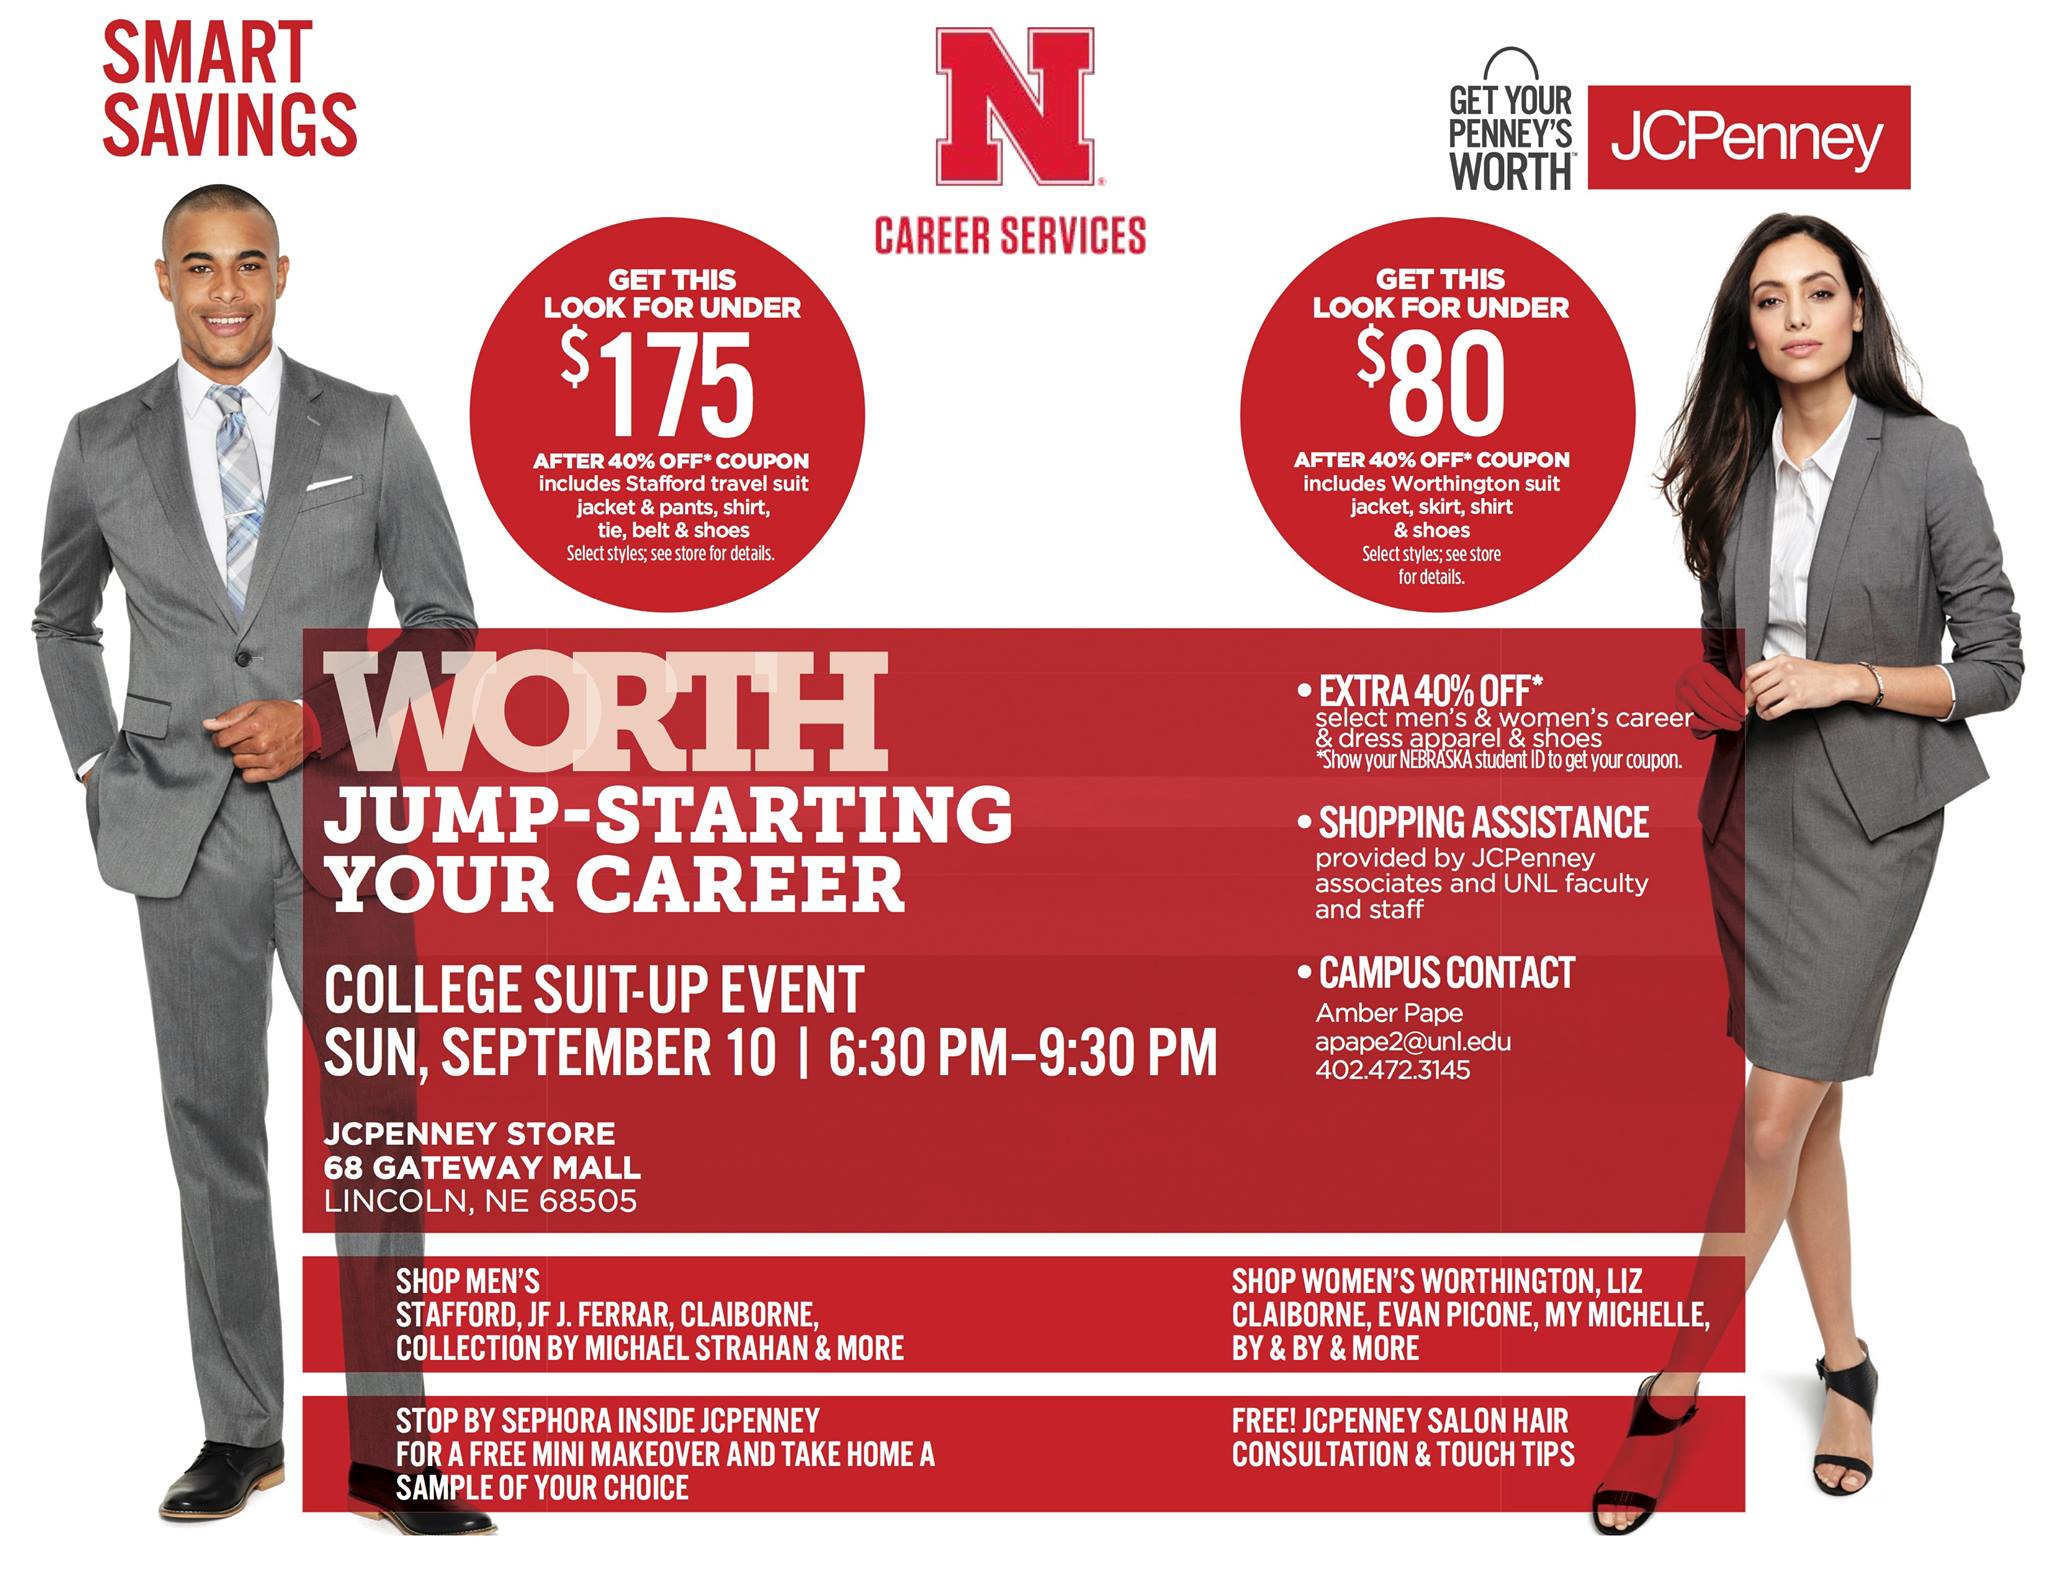 The JCPenney Suit Up event